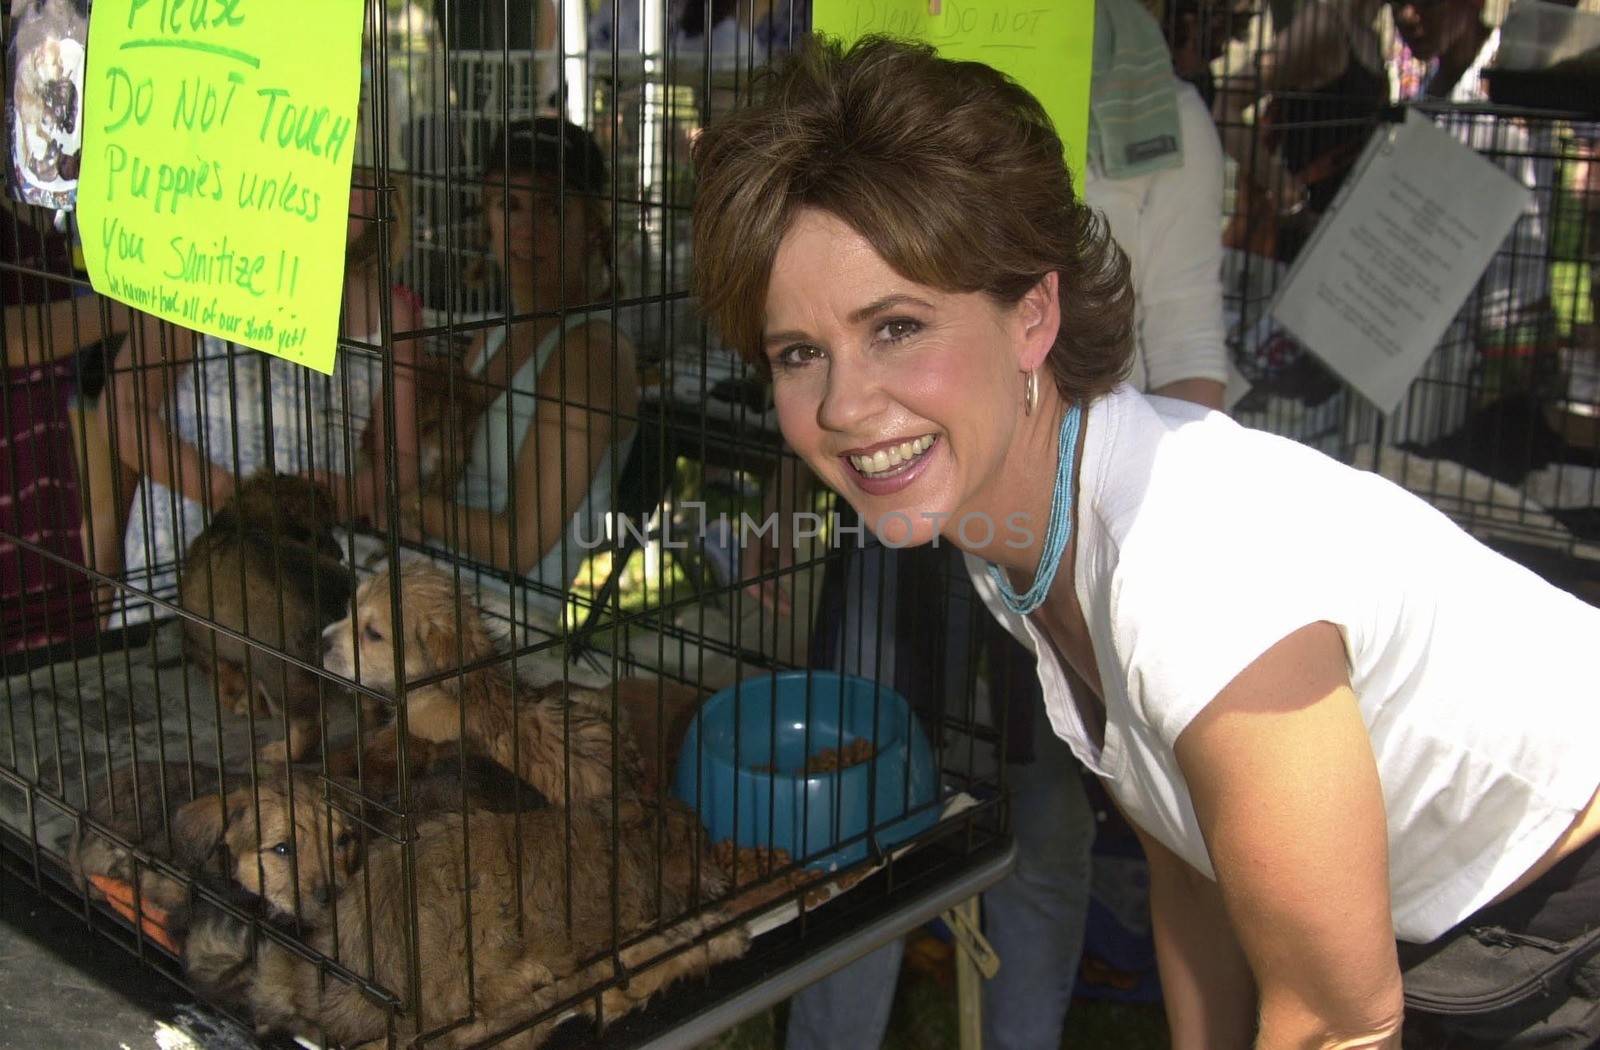 Linda Blair at Worldfest LA to help promote Veganism, Animal Rights and other causes. Van Nuys 07-30-00